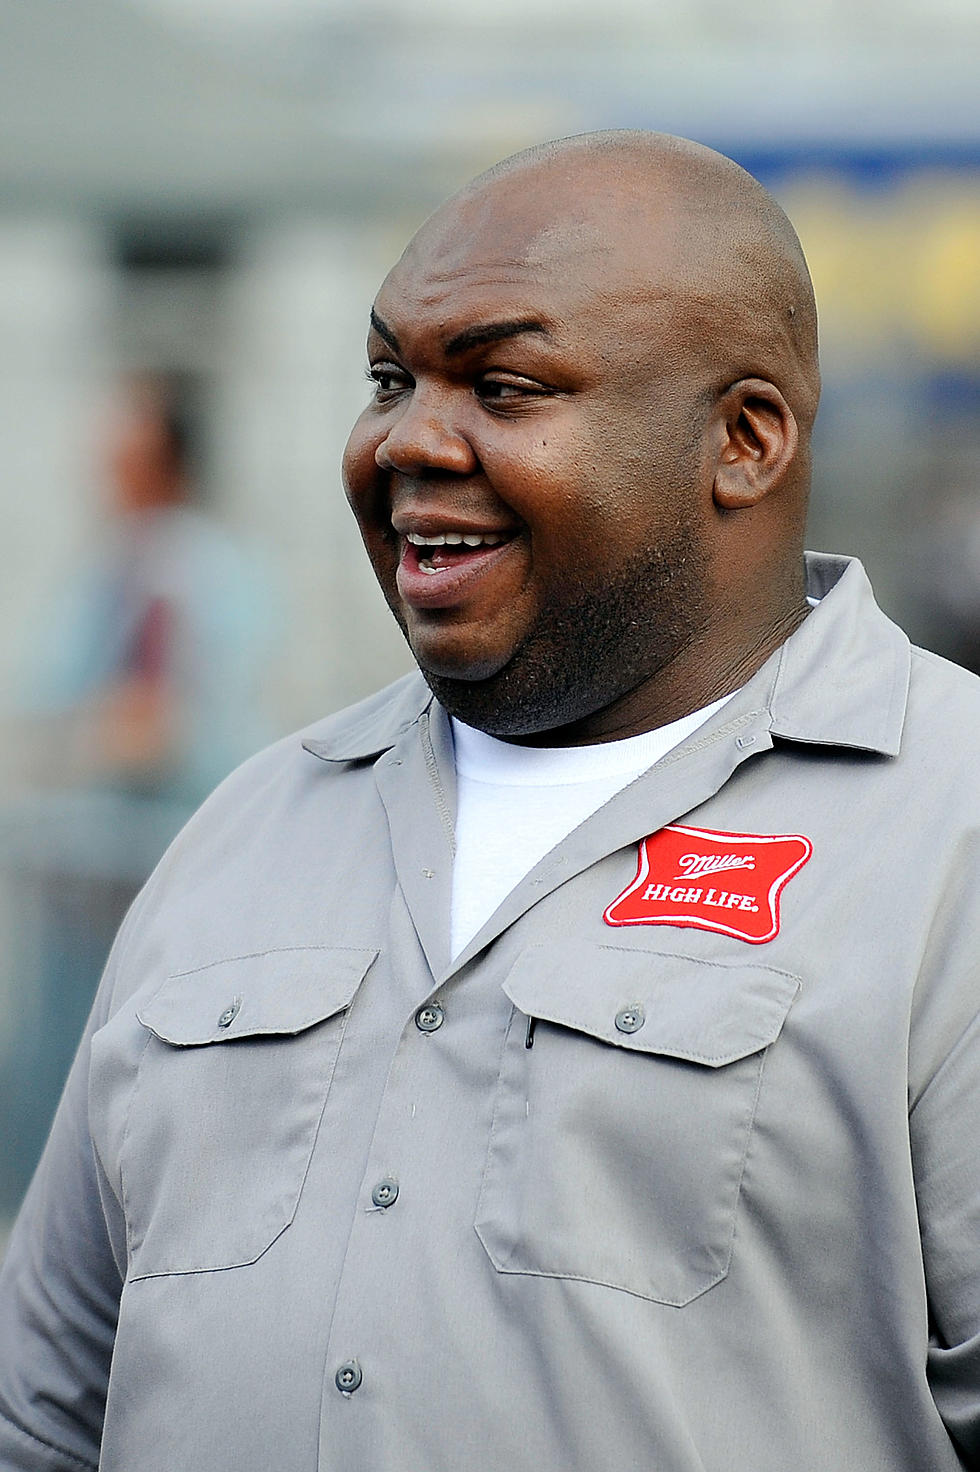 Windell Middlebrooks, the ‘Miller High Life’ Delivery Man, Dies at 36